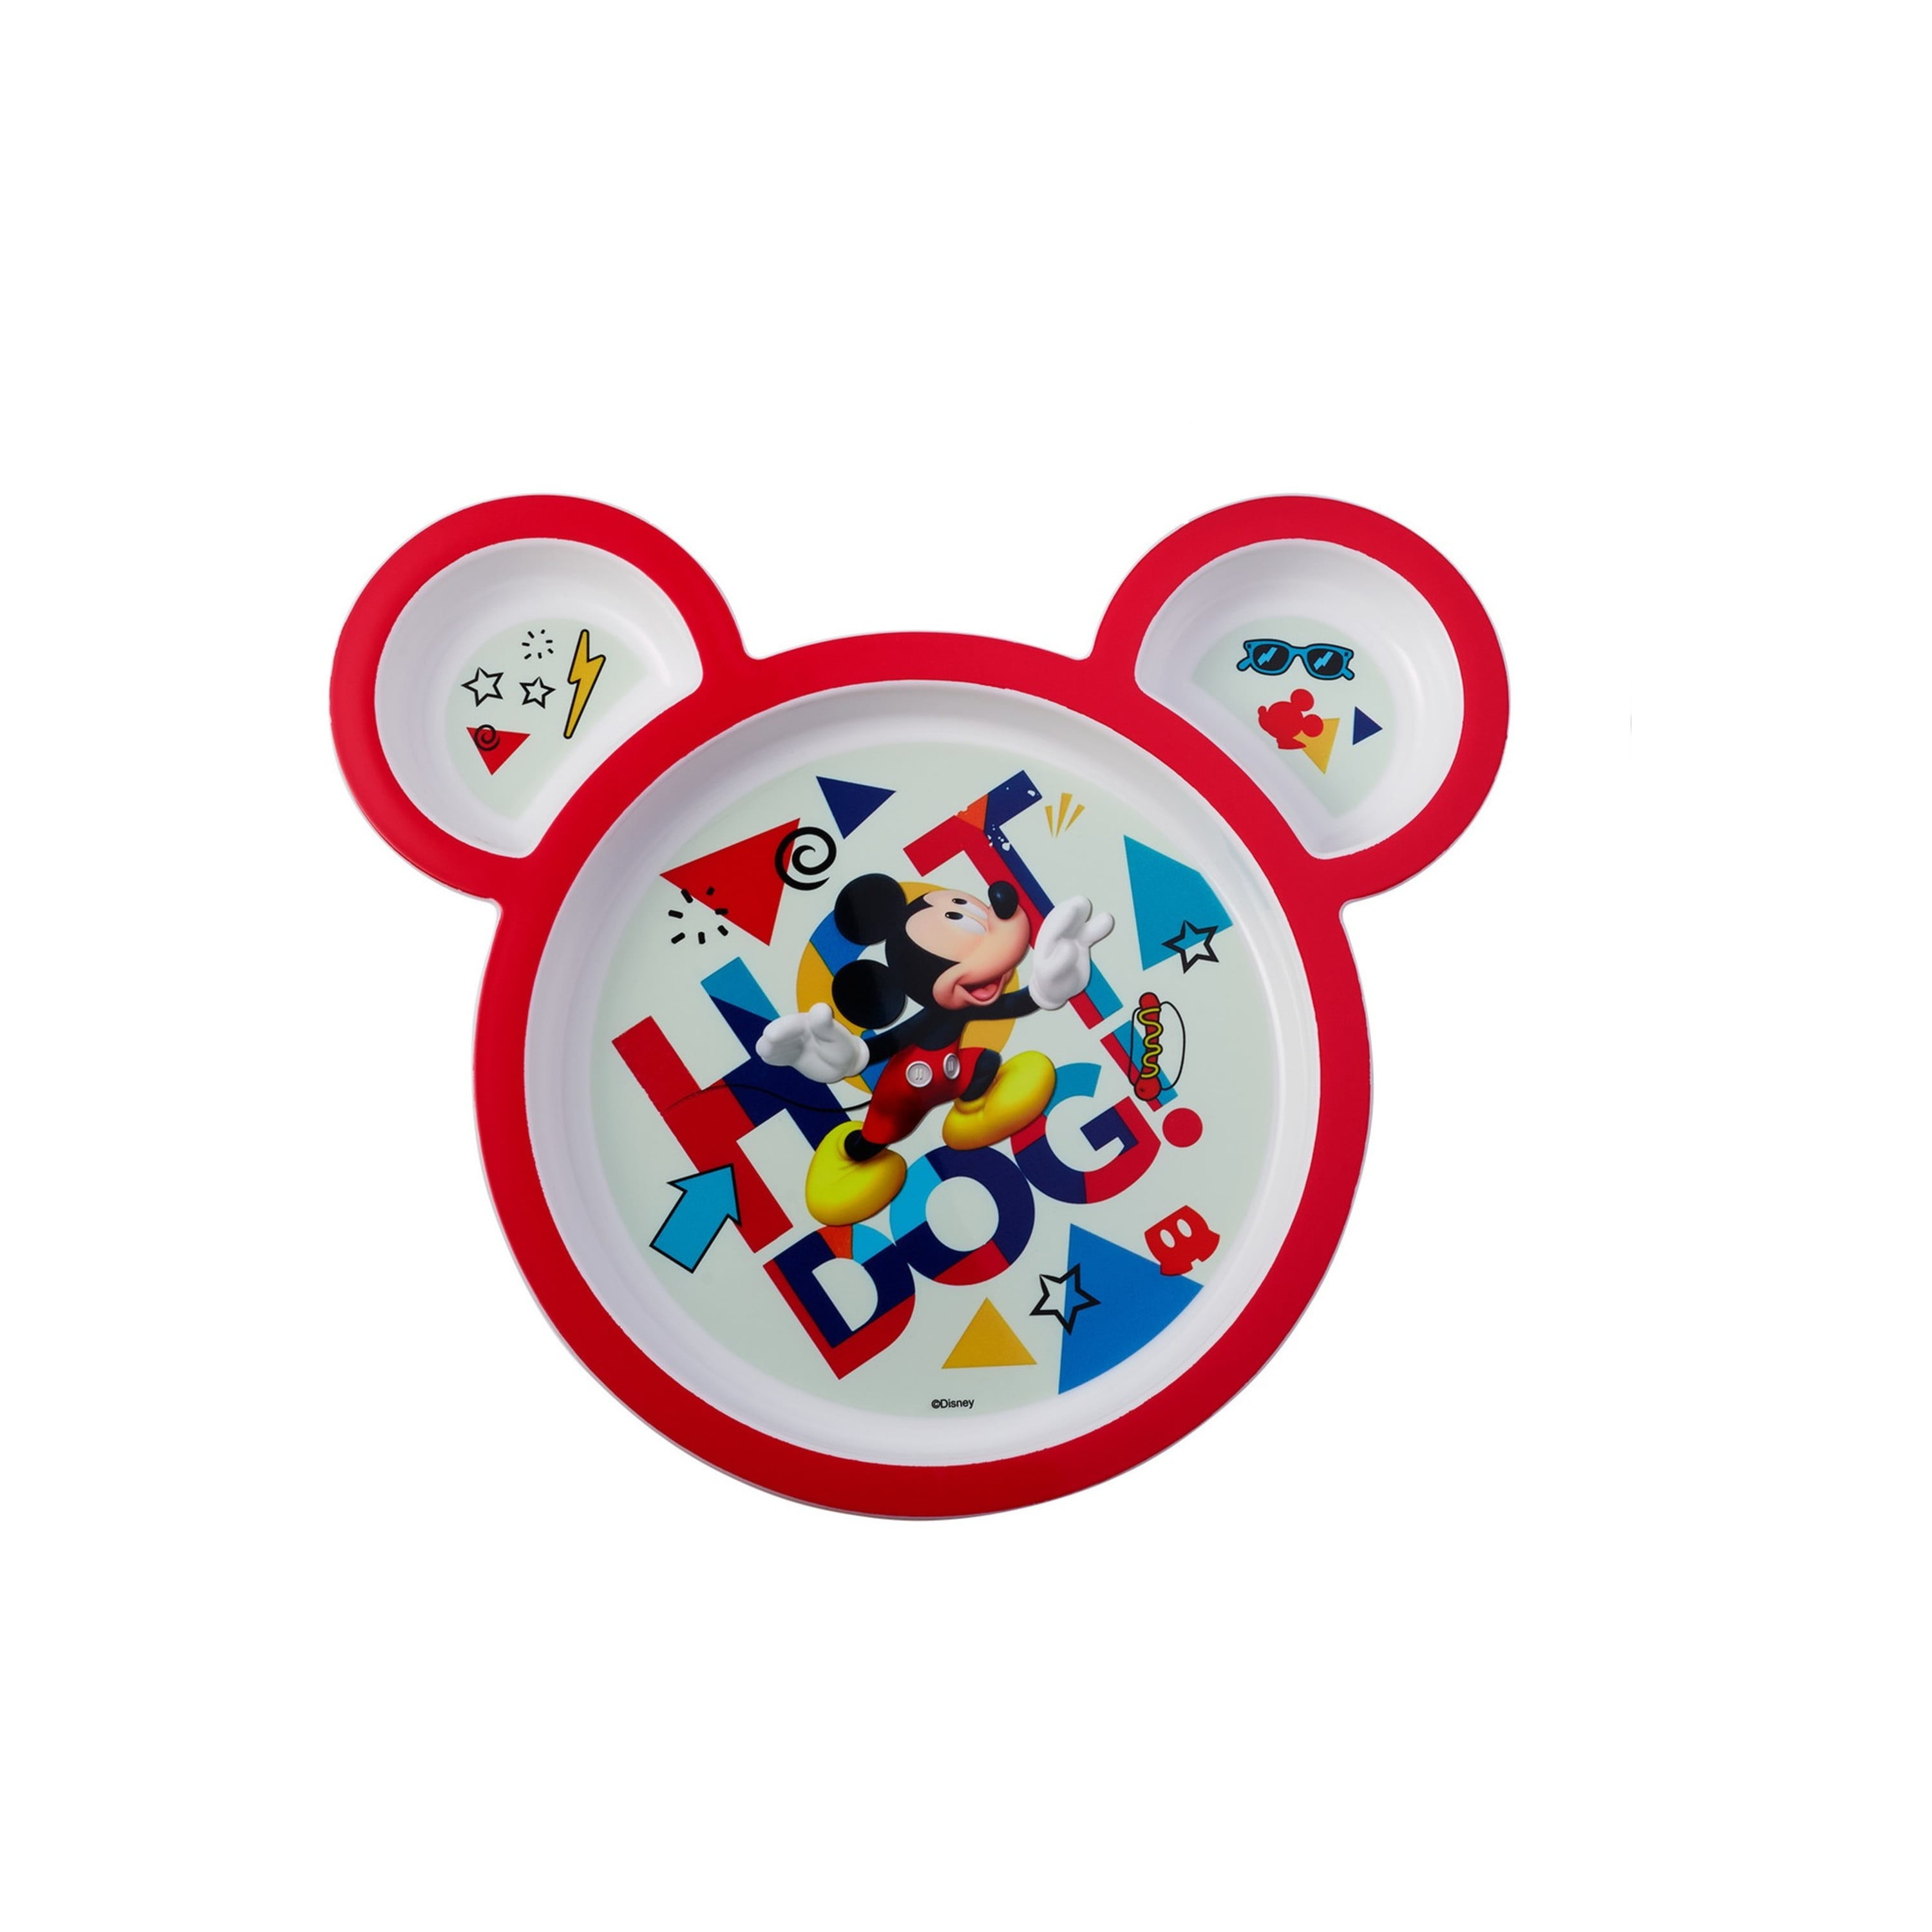 Disney Mickey Mouse Togetherness Dinner Set, Home